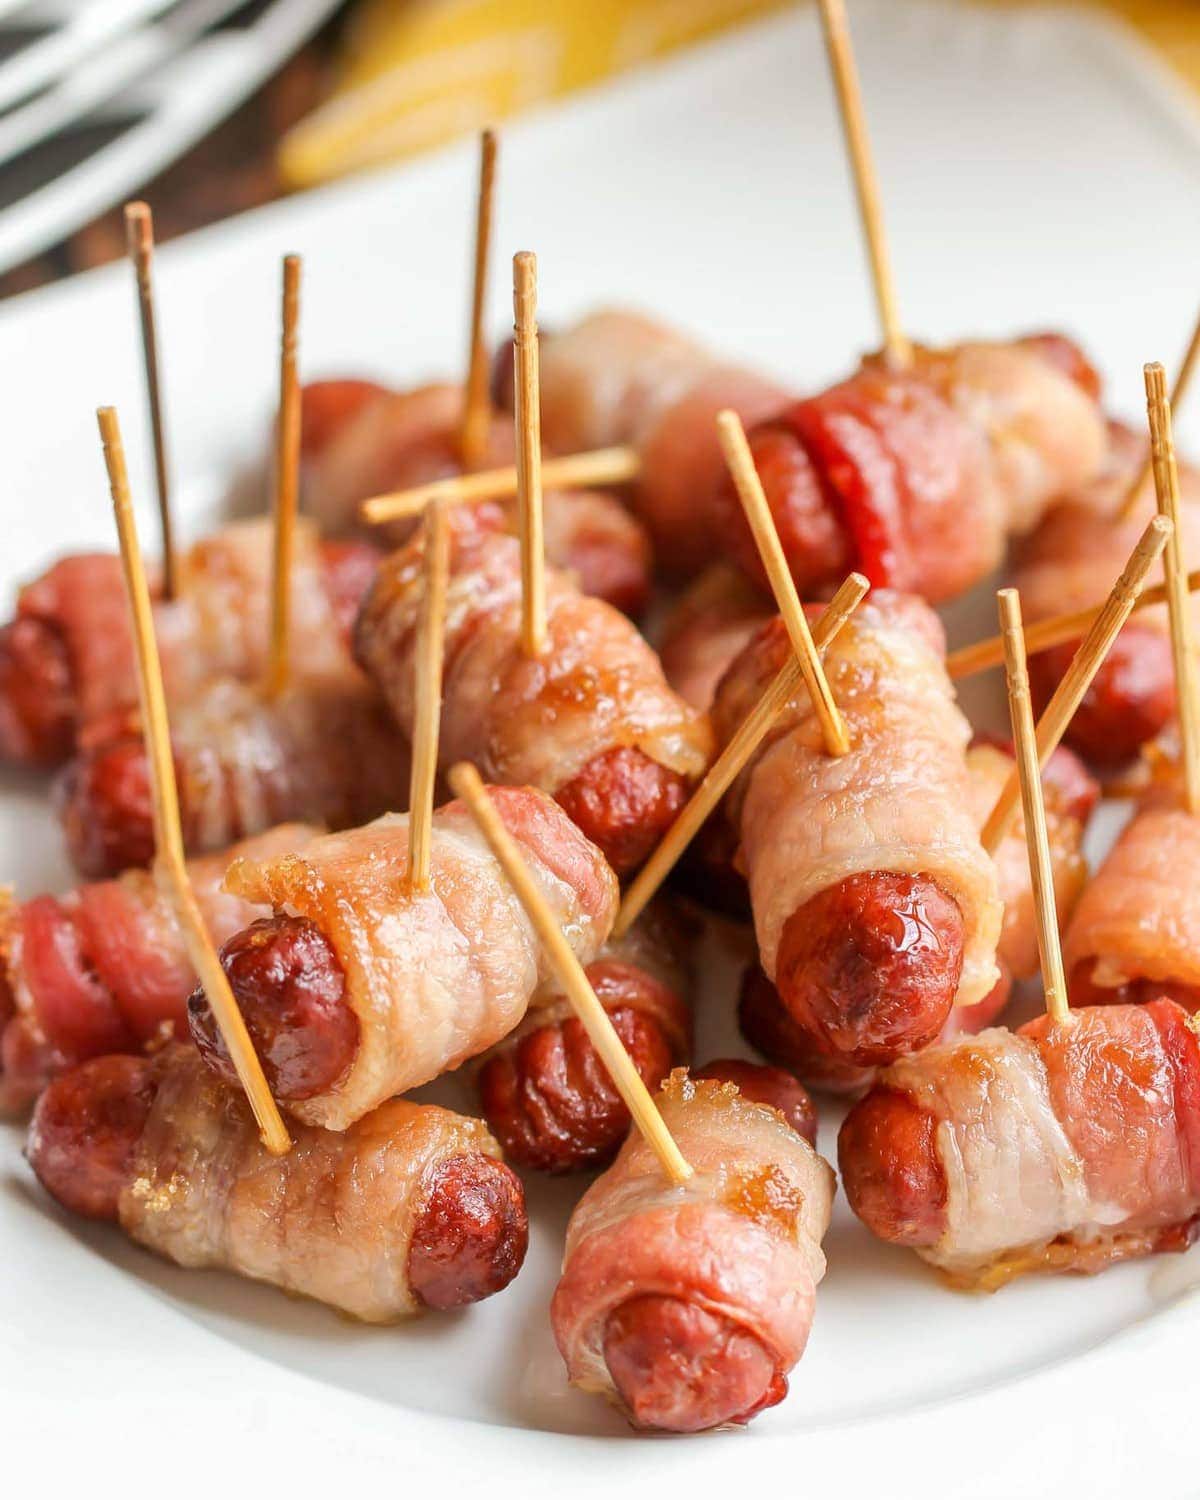 Bacon Wrapped Little Smokies held together with toothpicks